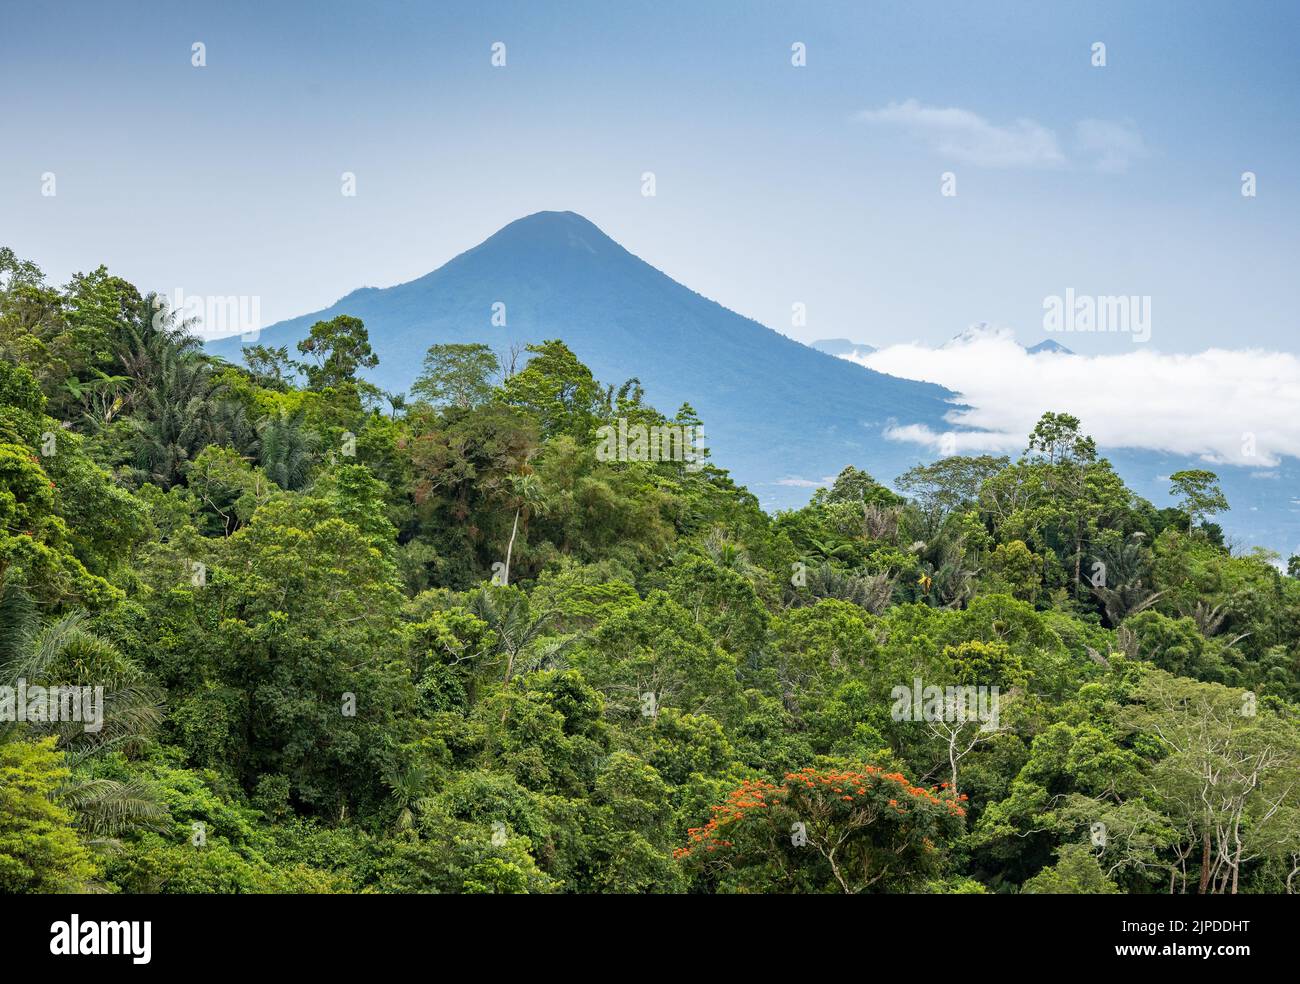 A cone shaped volcano rises above lush green forest. Sulawesi, Indonesia. Stock Photo